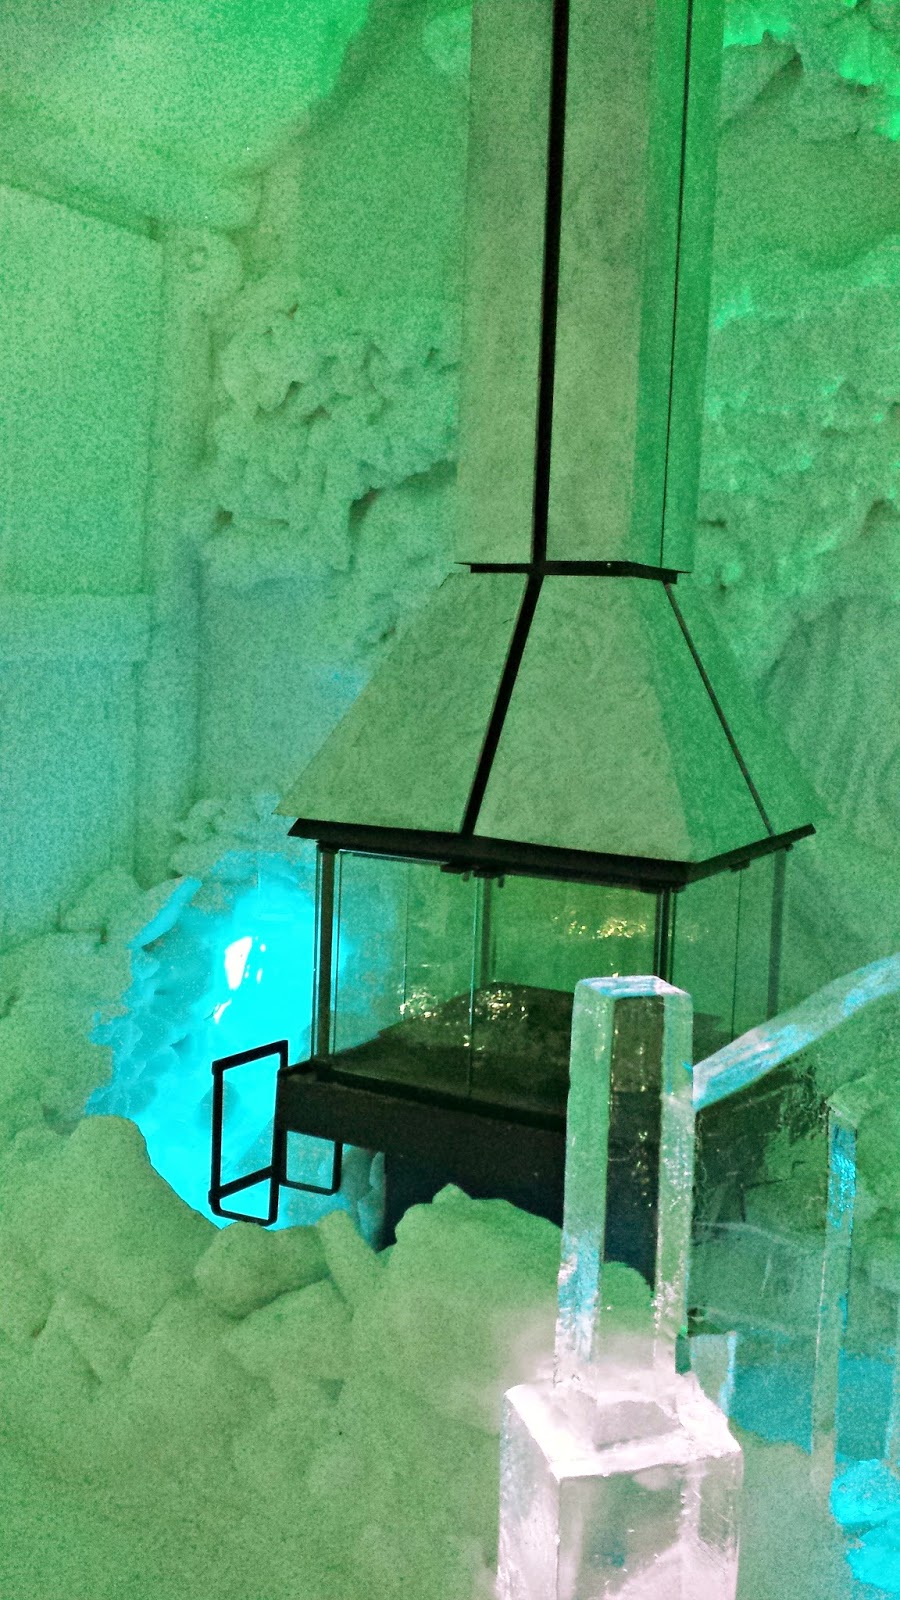 Fireplace in the Japanese Tea Ceremony room at the Ice Hotel, Quebec City